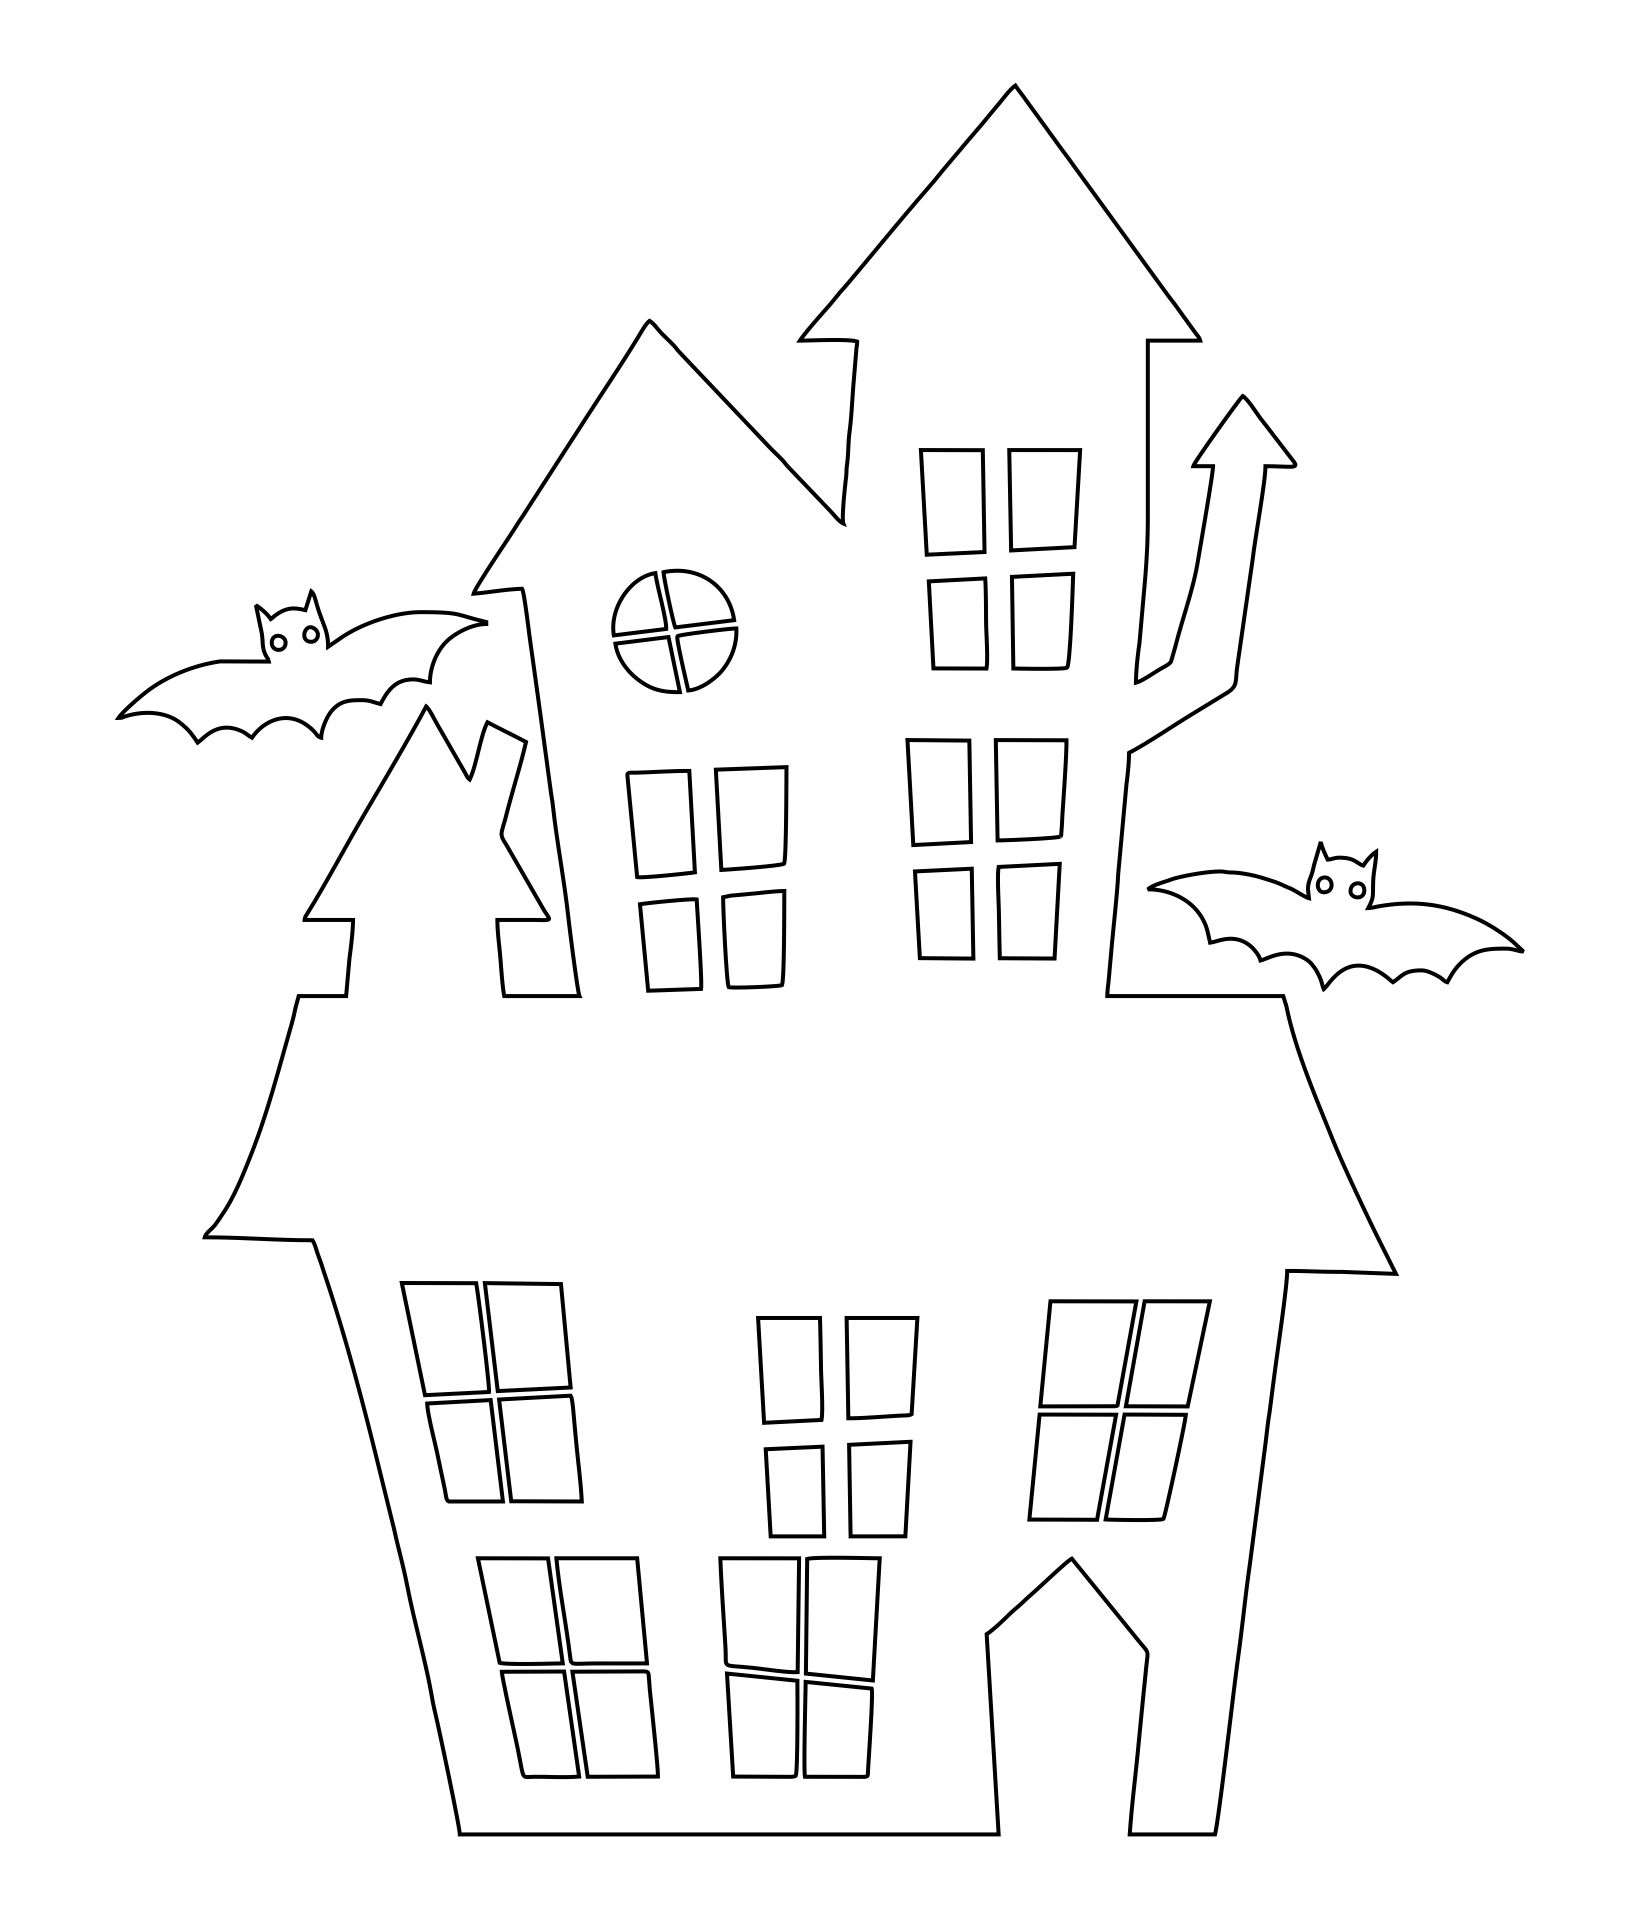 Haunted House Template Printable